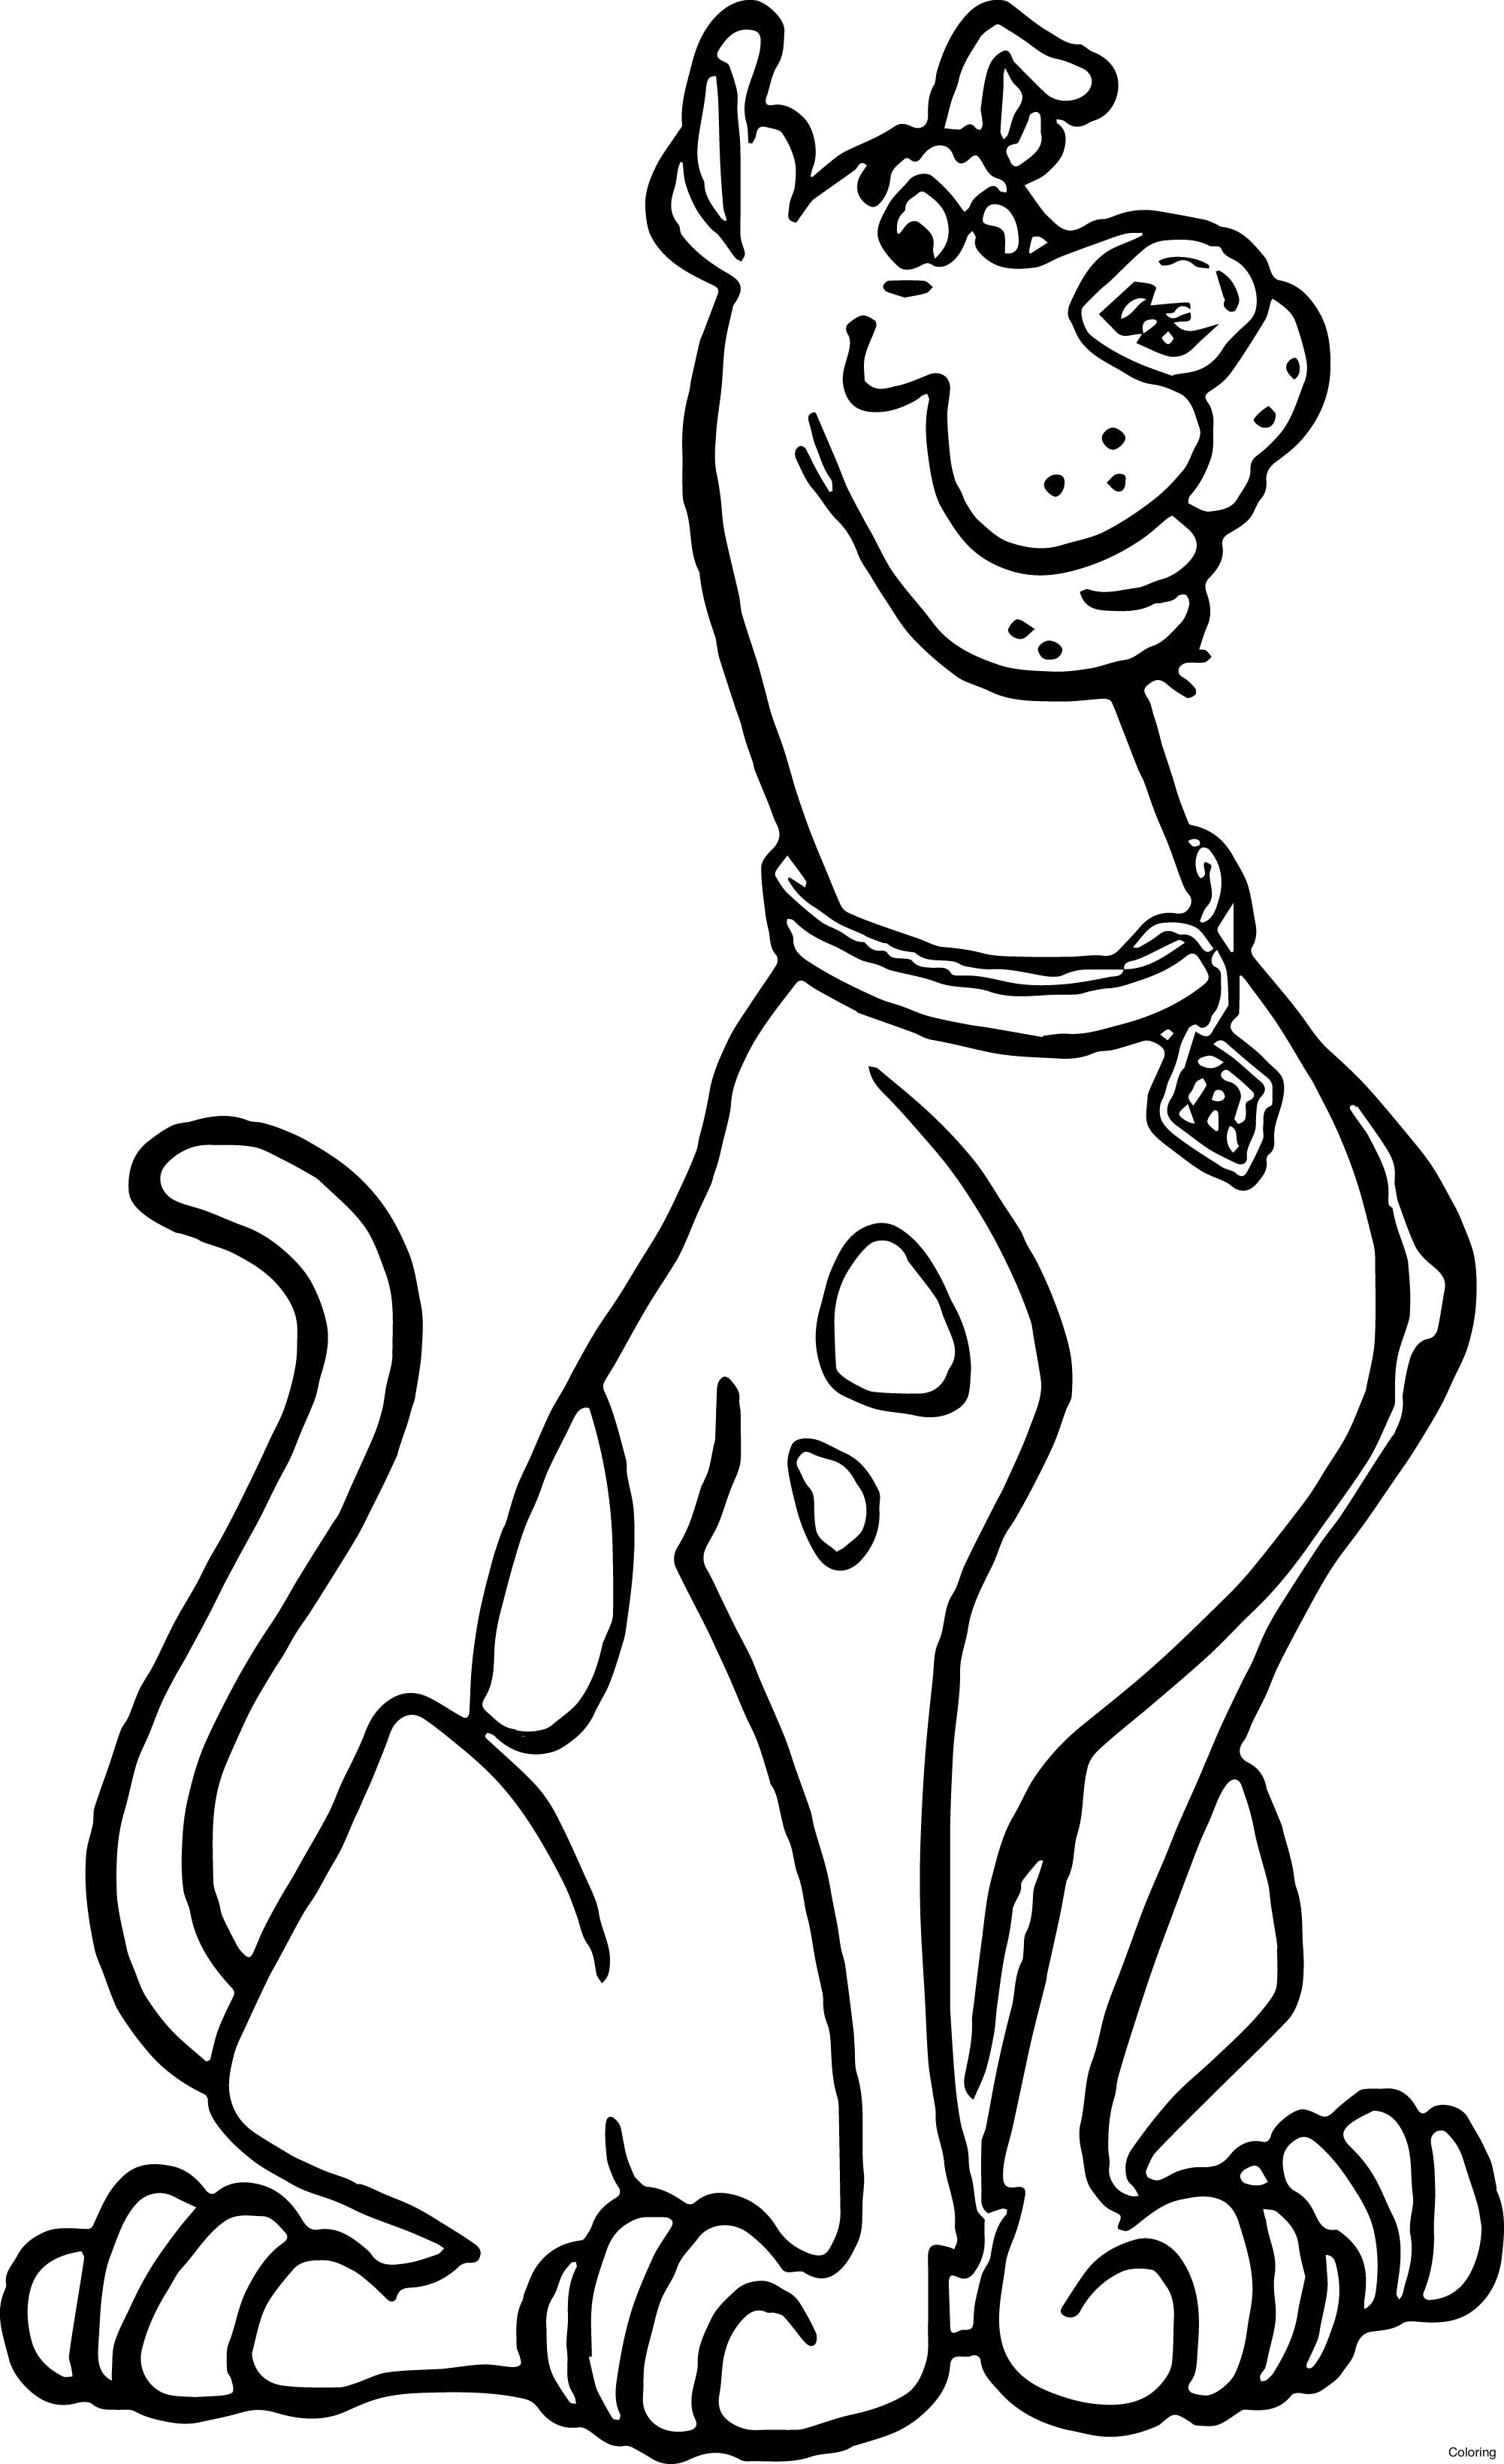 Coloring Sheets For Boys Scooby Doo
 10 scooby doo coloring pages